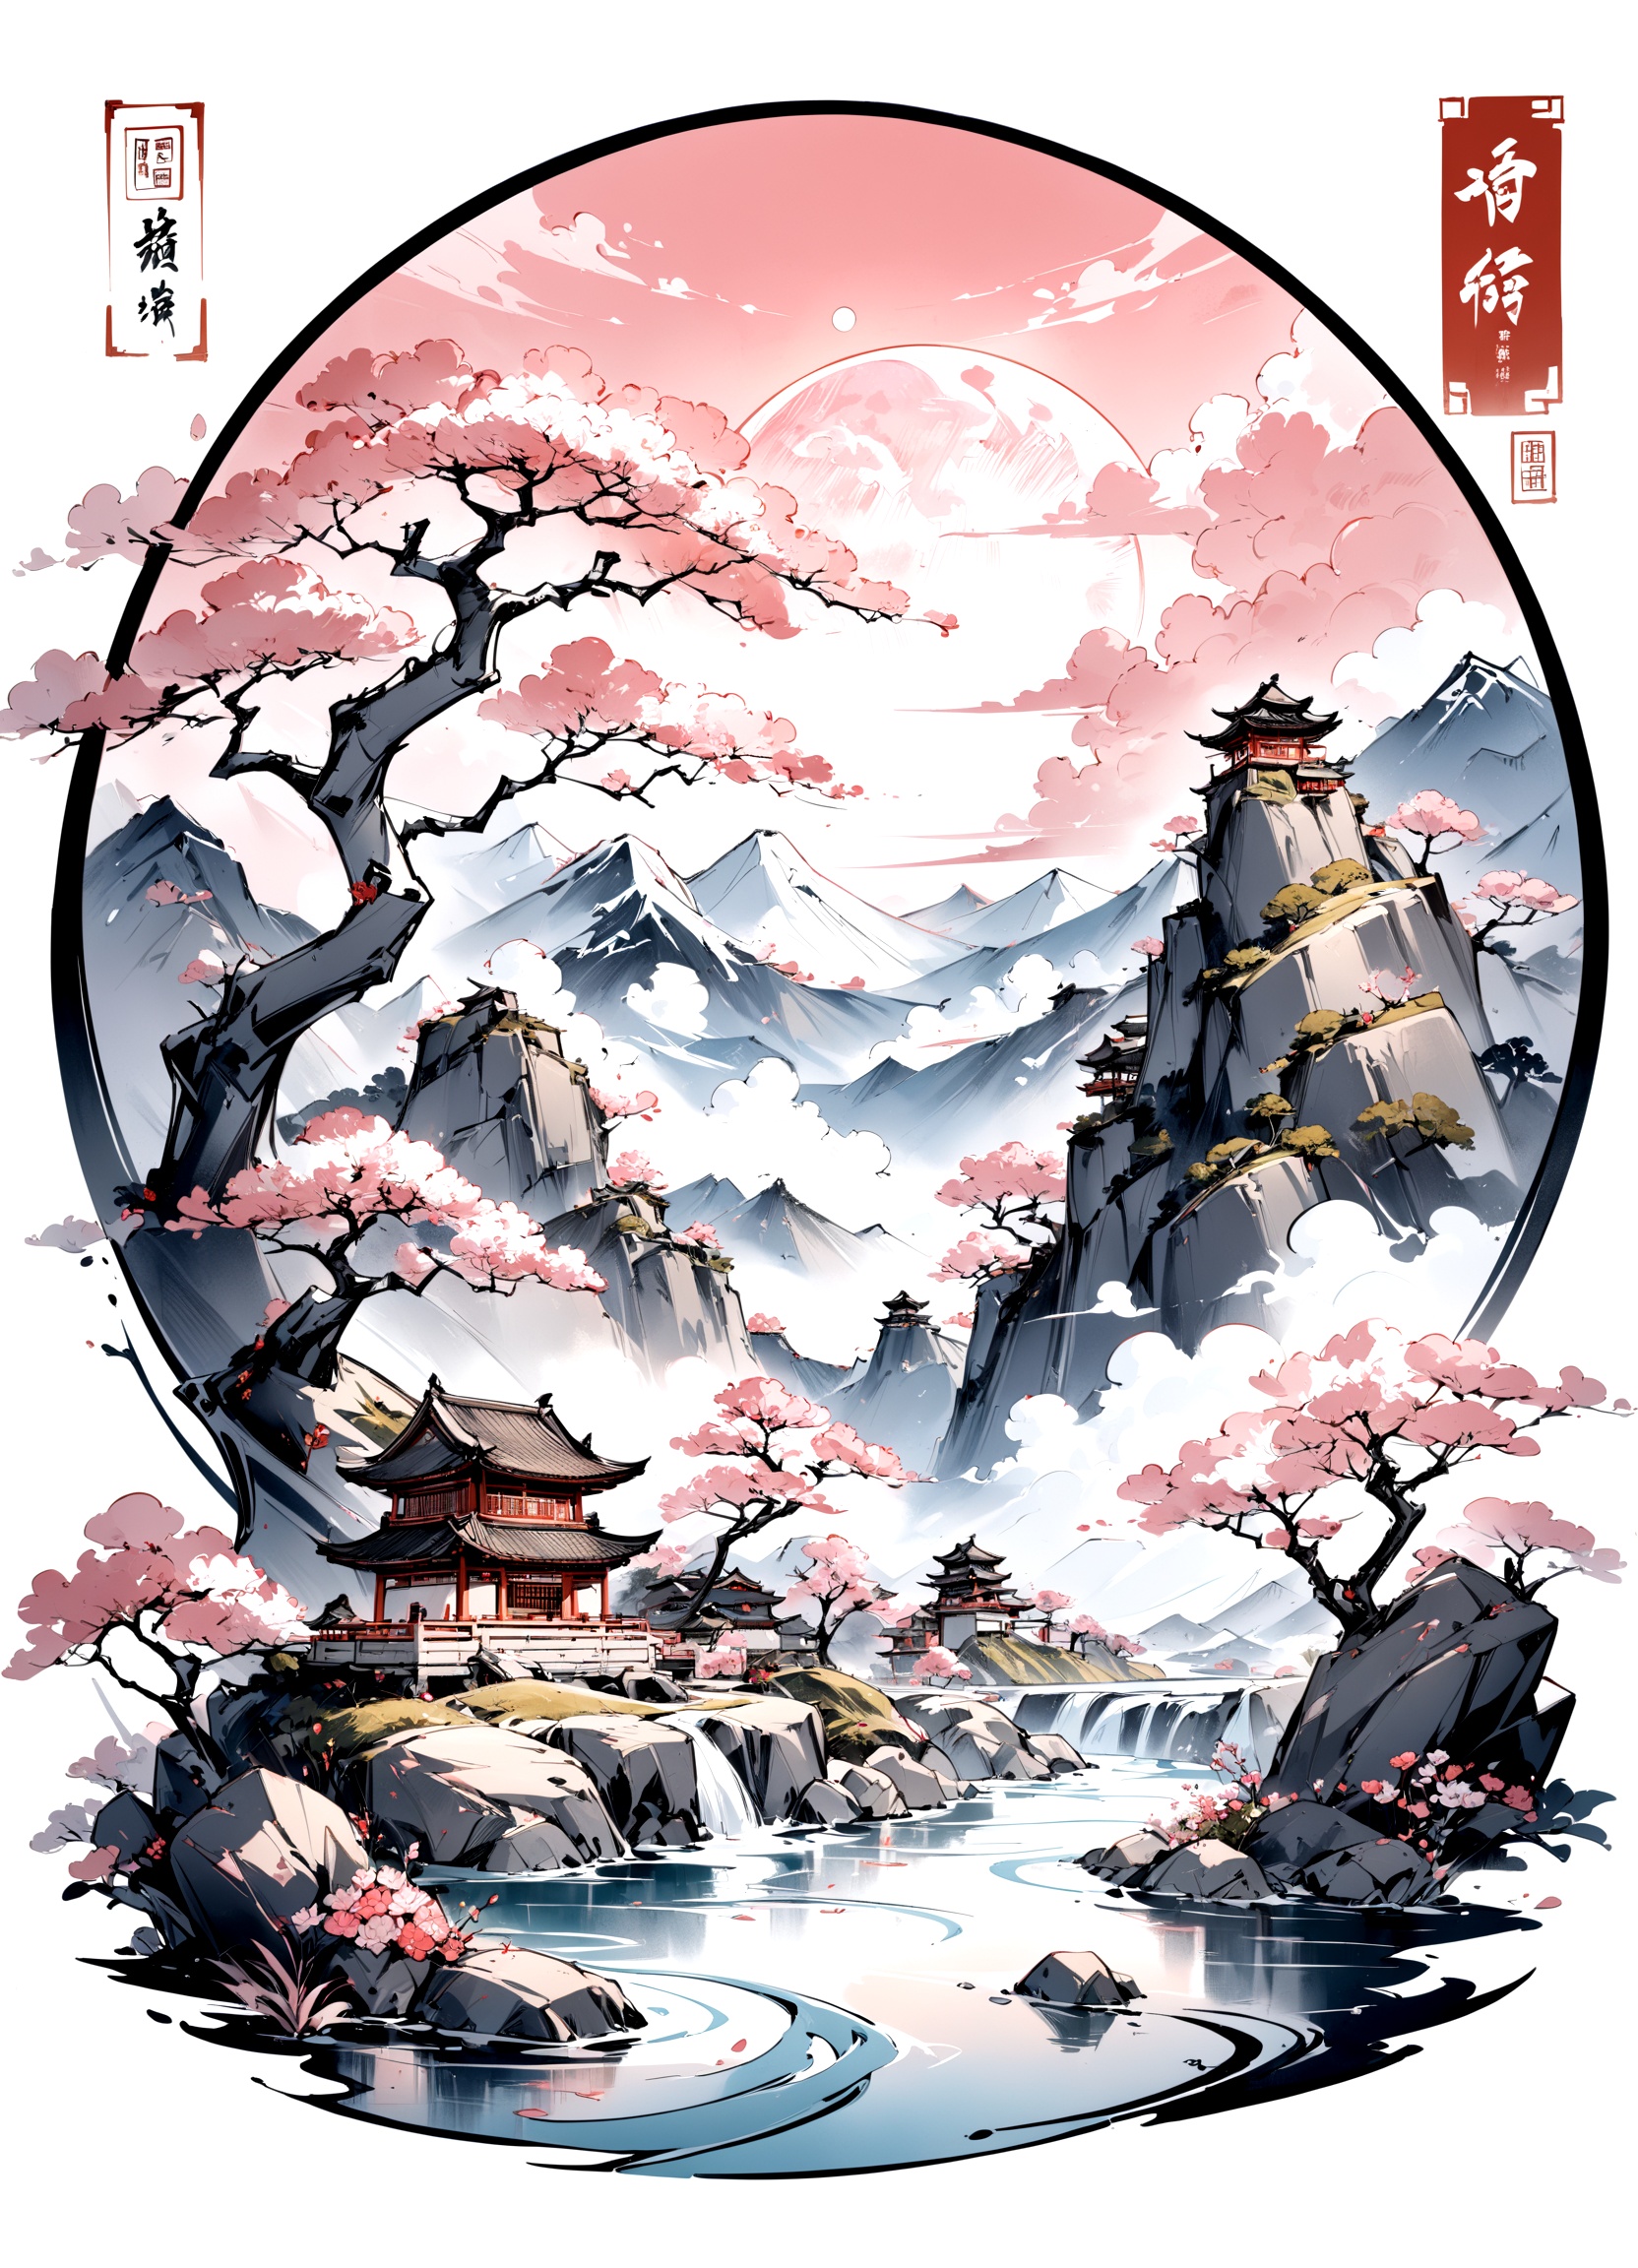 ((masterpiece)),((best quality)), traditional Chinese painting,inkwash painting,mountain,cloud,river,flower,tree,pink moon, in the style of zen, white and yellow,  traditional chinese,clouds,stamp,text,((curved white background)),